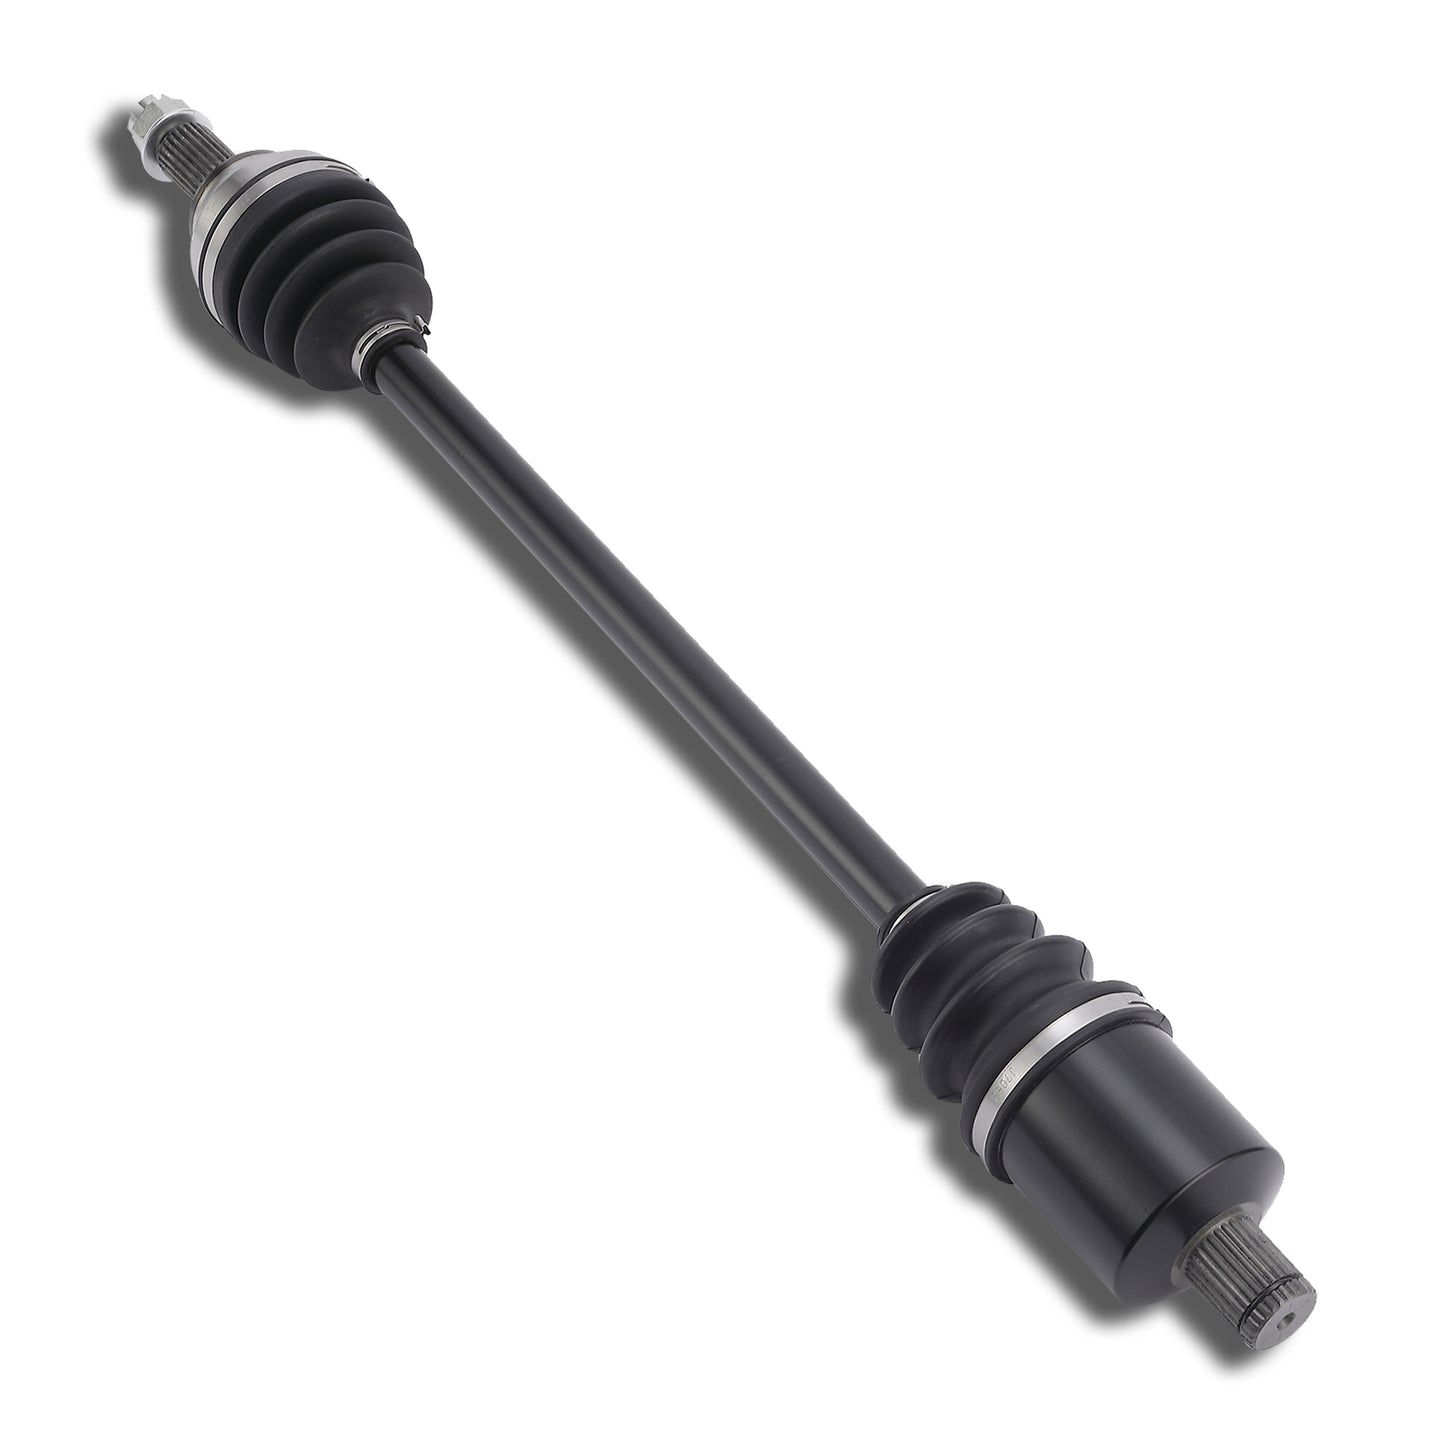 2 CAM-PO332 Front Left Drive Shaft CV Axle for POLARIS (2016-2021) RZR XP 4 Turbo BF, RZR XP Turbo BF / (2018-2019) RZR XP Trail BF